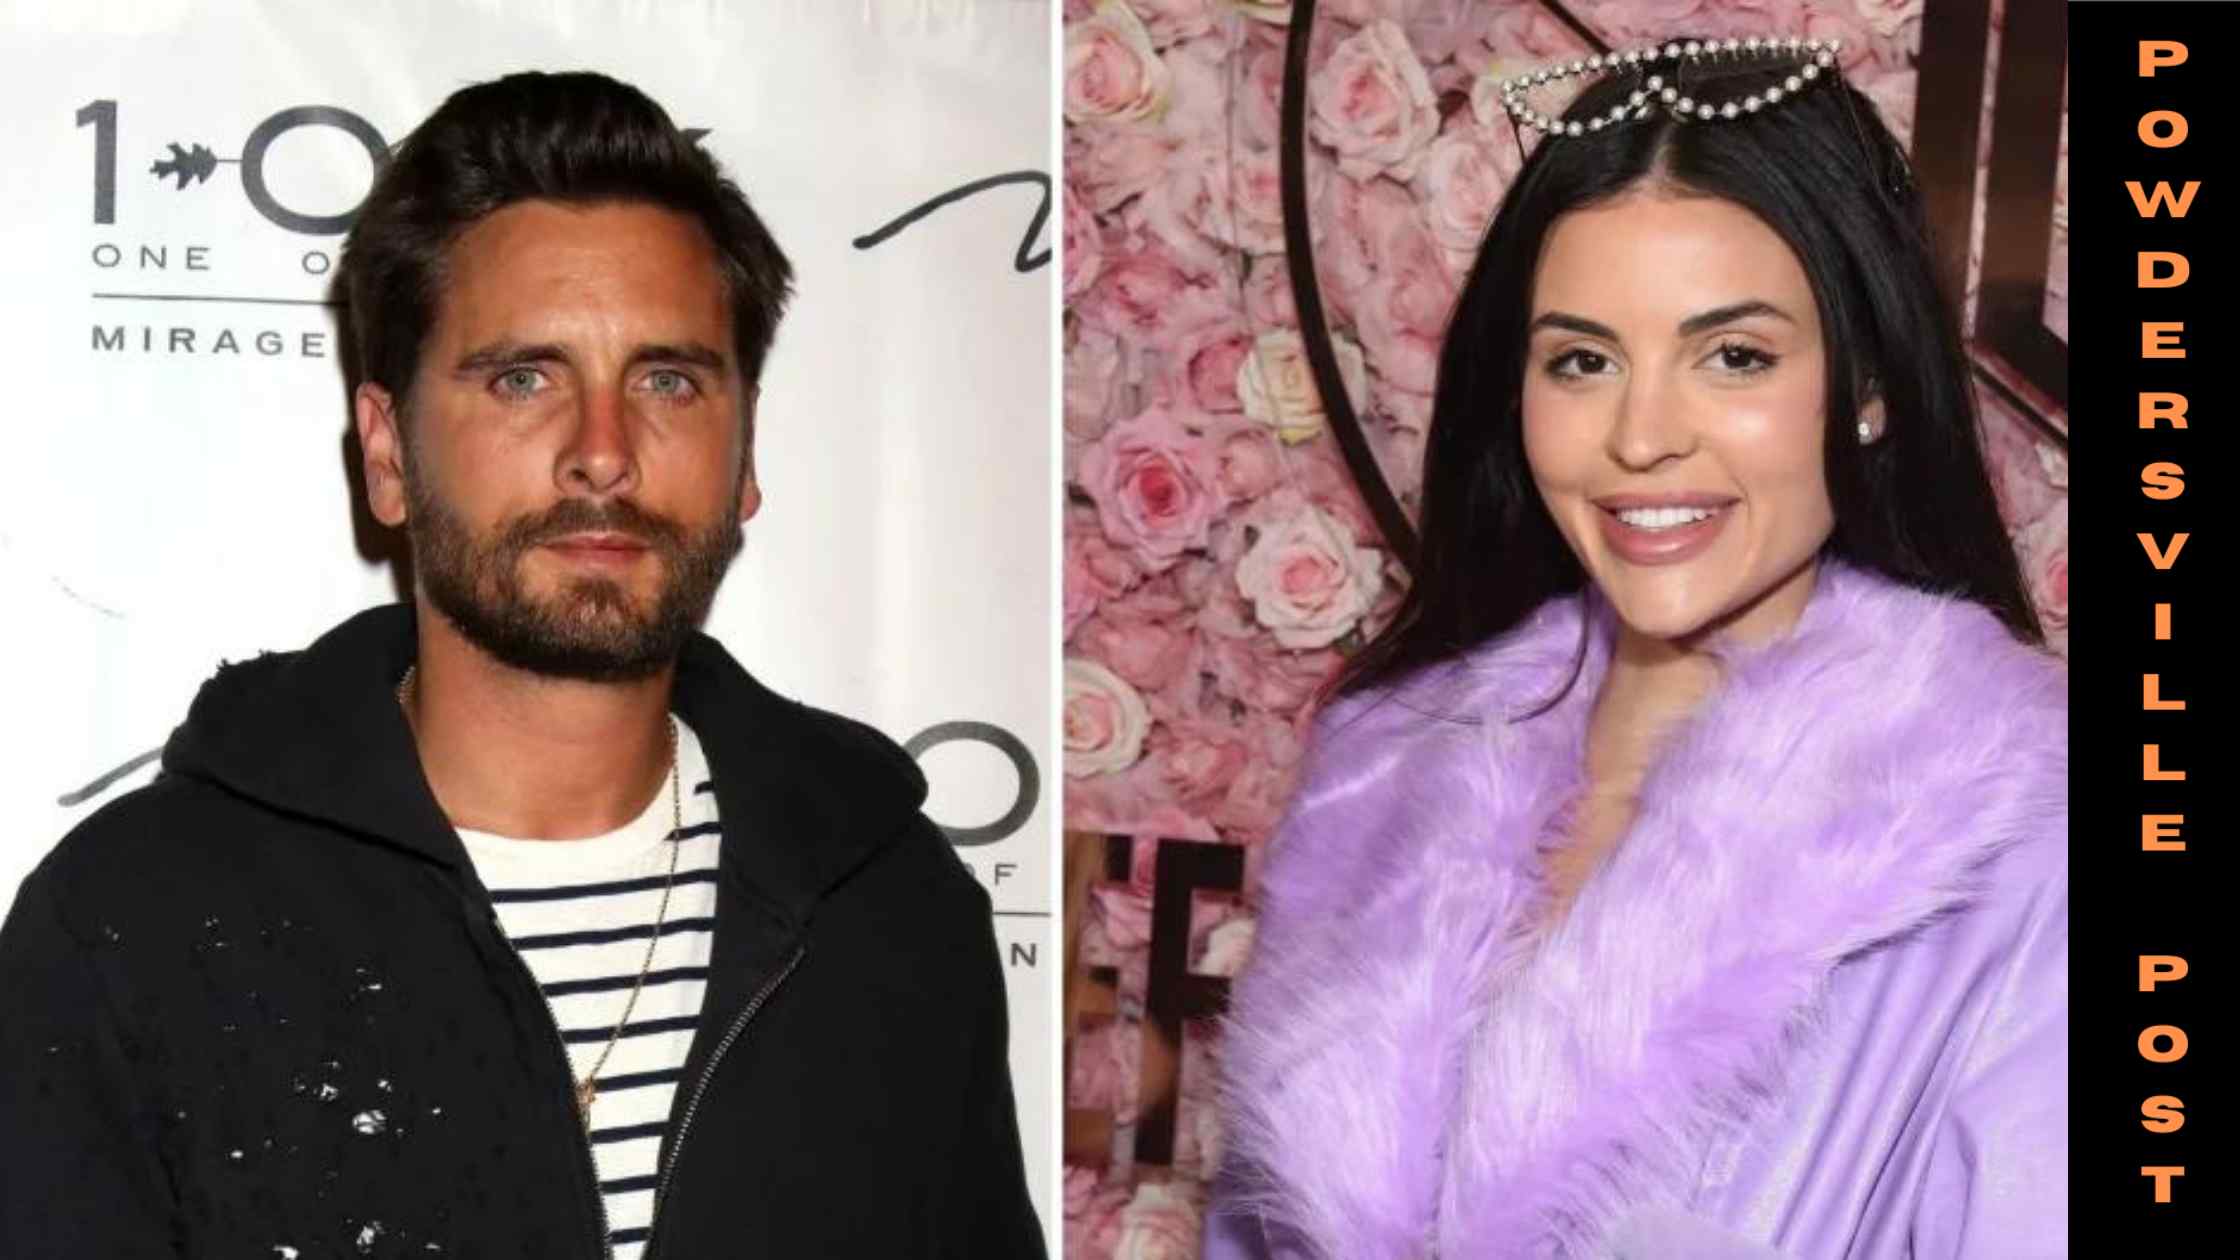 Reality Star Scott Disick Is Accused Of Having Romantic Relationship With Holly Scarfone, Rumor Persists